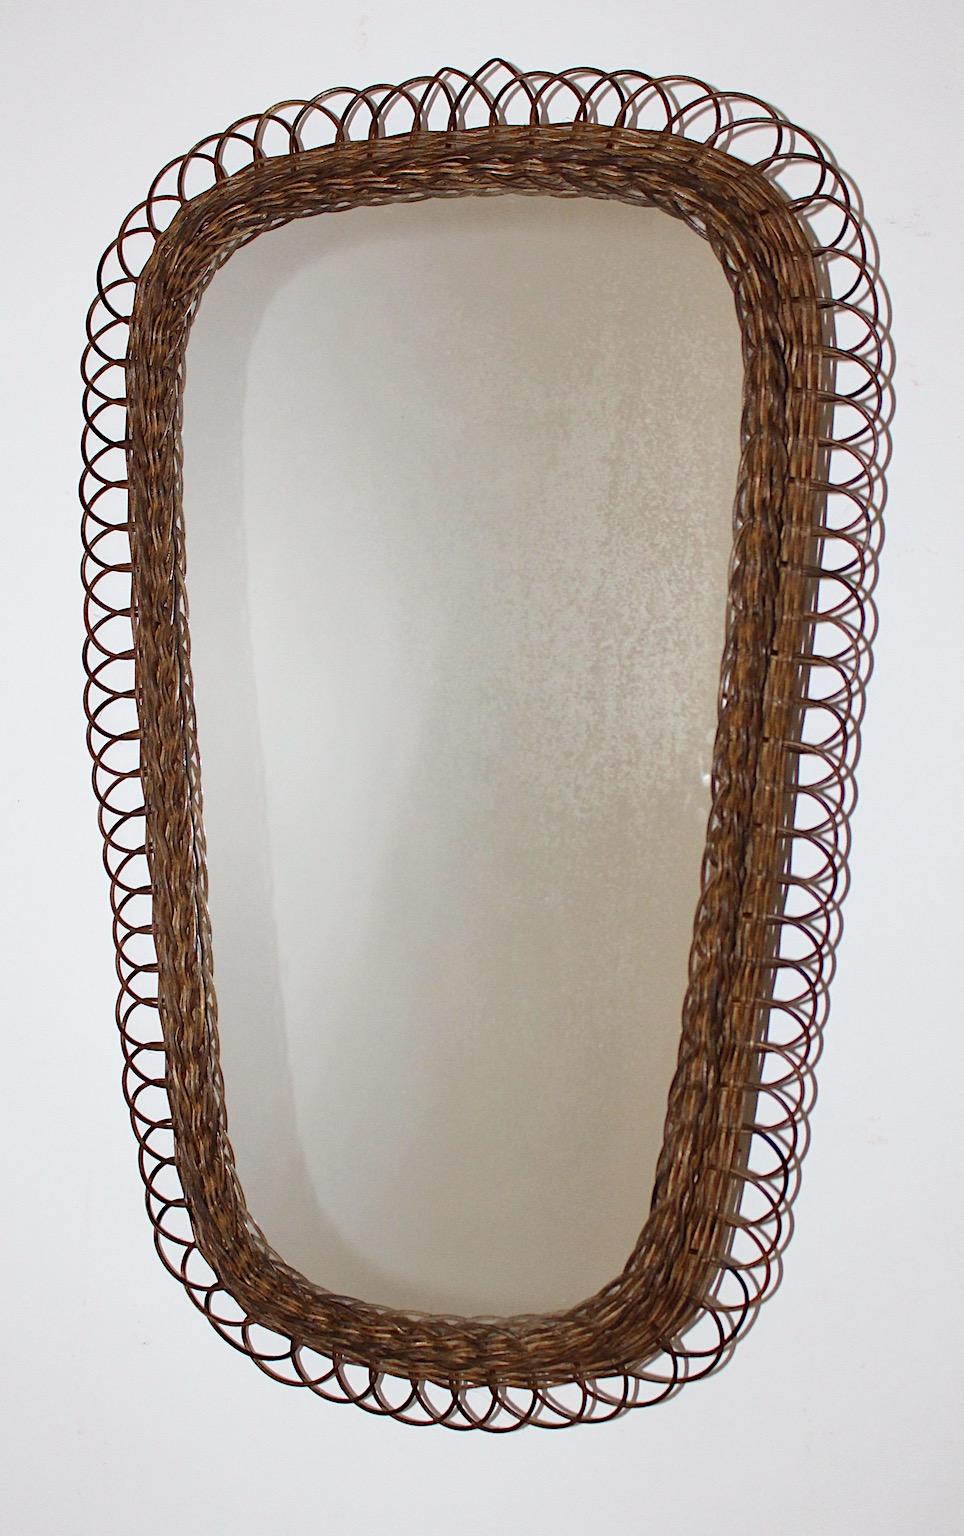 20th Century Mid Century Modern Vintage Brown Willow Oval Wall Mirror 1960s Germany For Sale